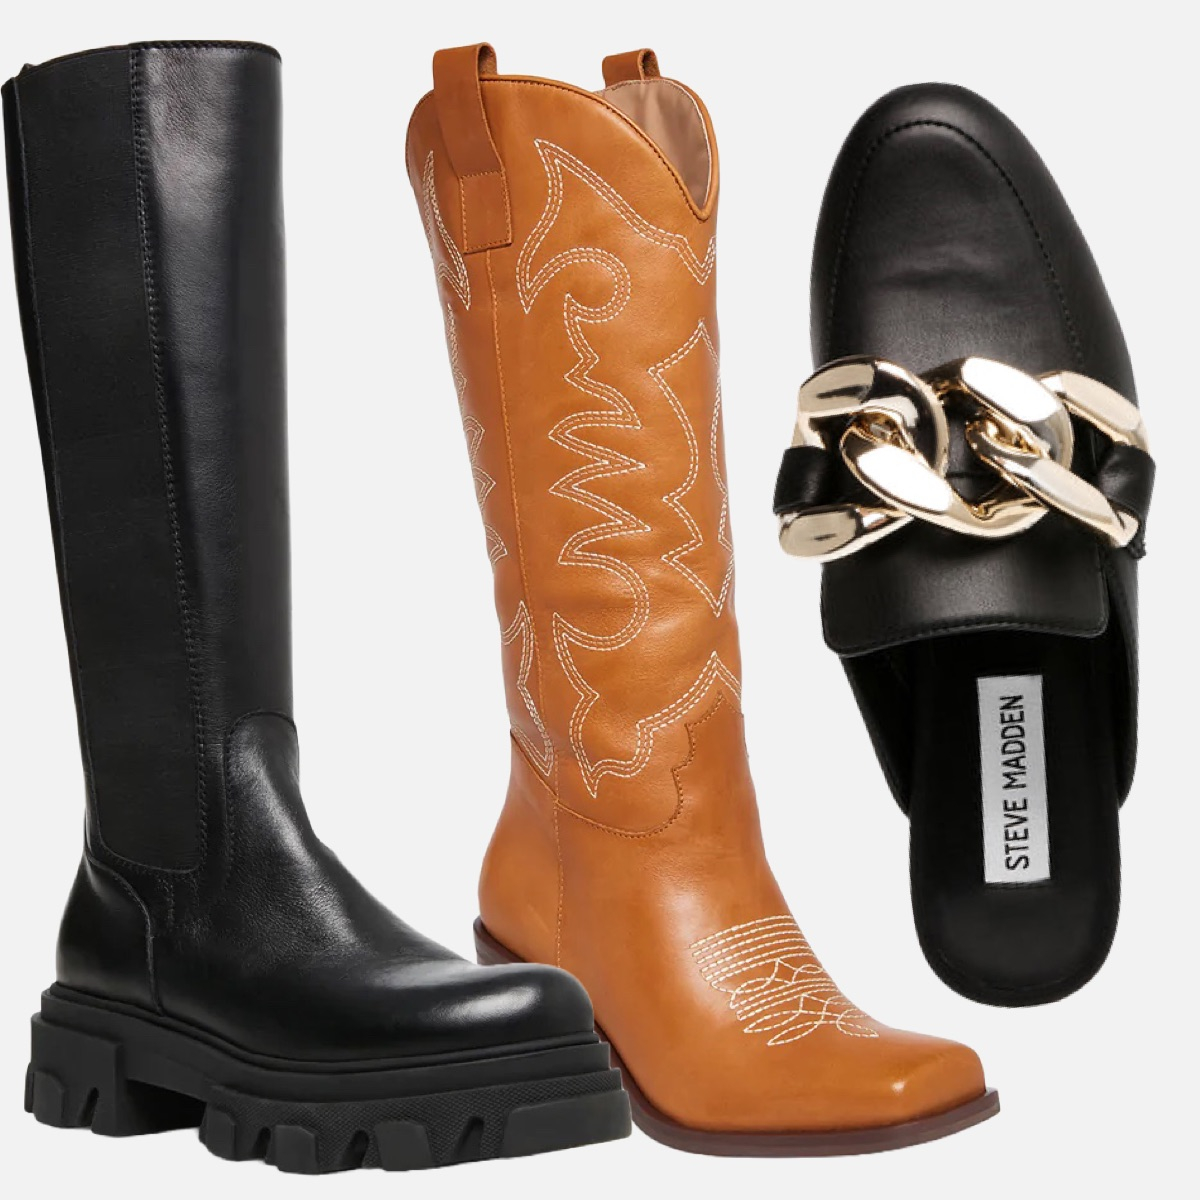 Steve Madden Extra 40% Off Sale: Score $130 Boots for $36 & More Deals